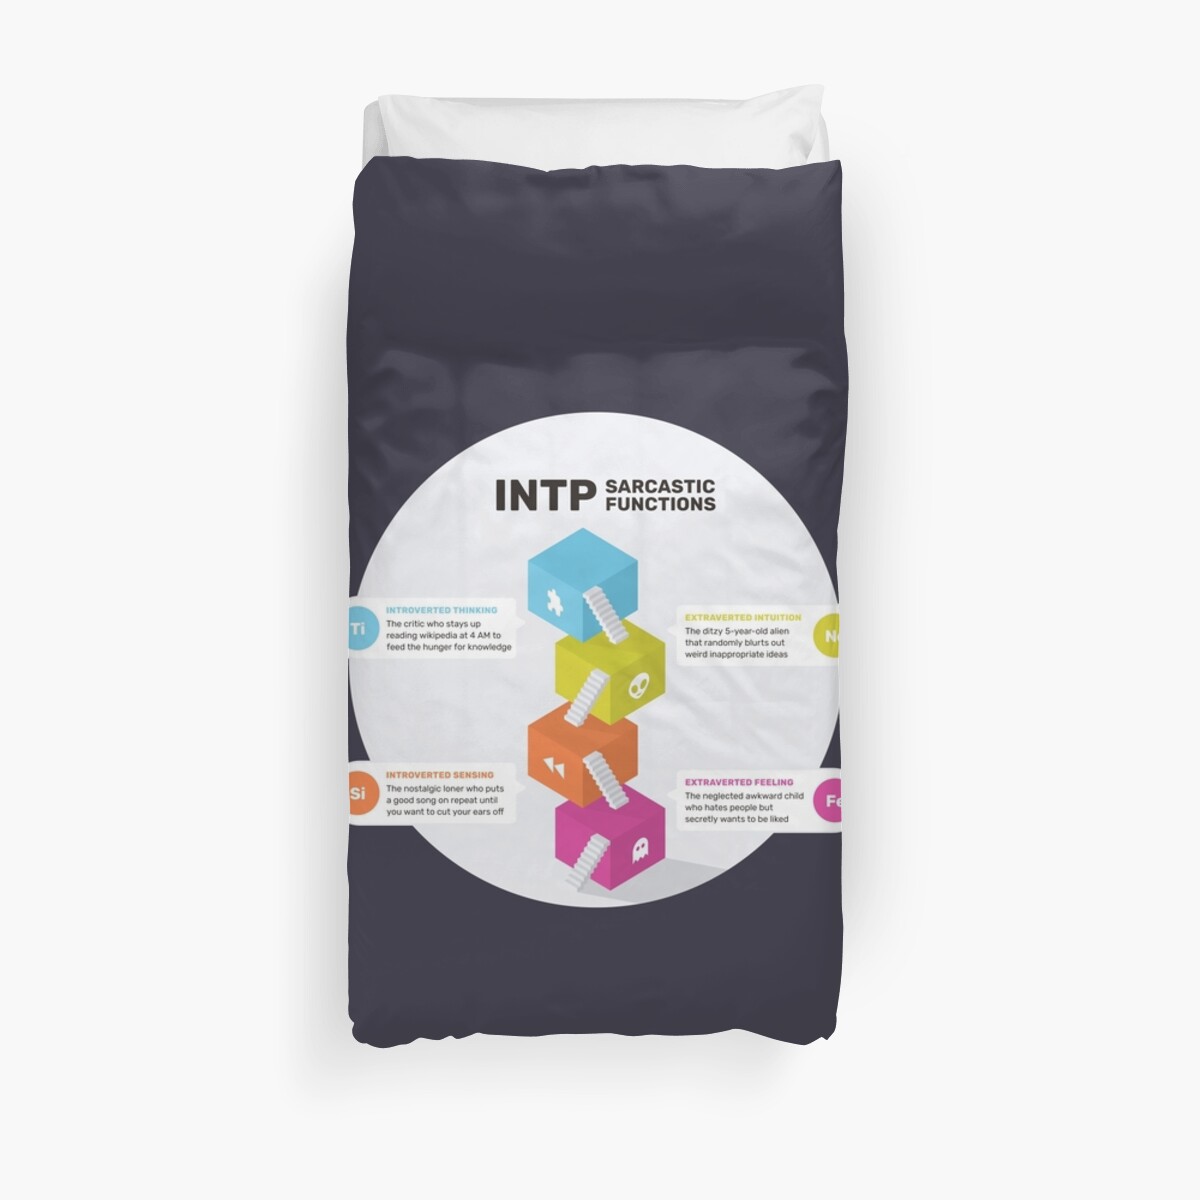 Intp Sarcastic Functions Duvet Cover By Eilamona Redbubble